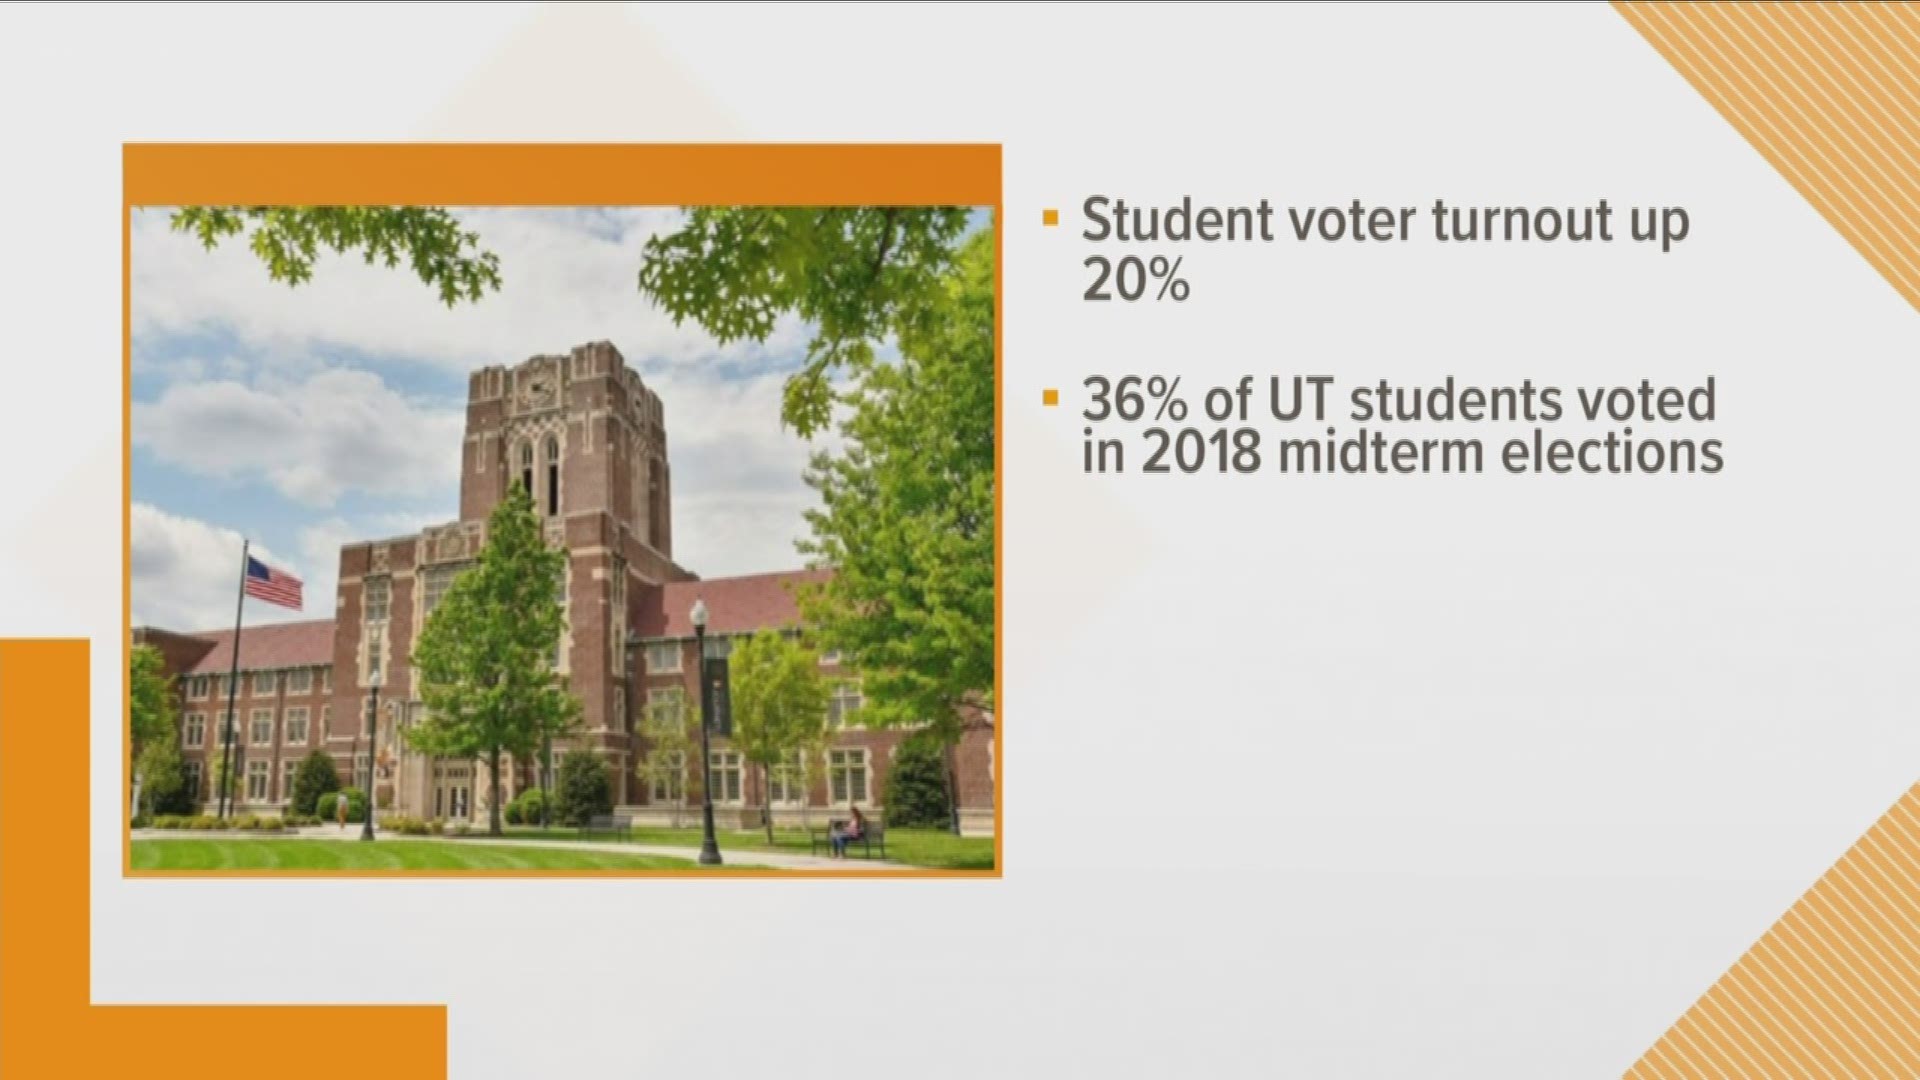 UT said 20% more students voted in the 2018 midterm elections compared to 2014.